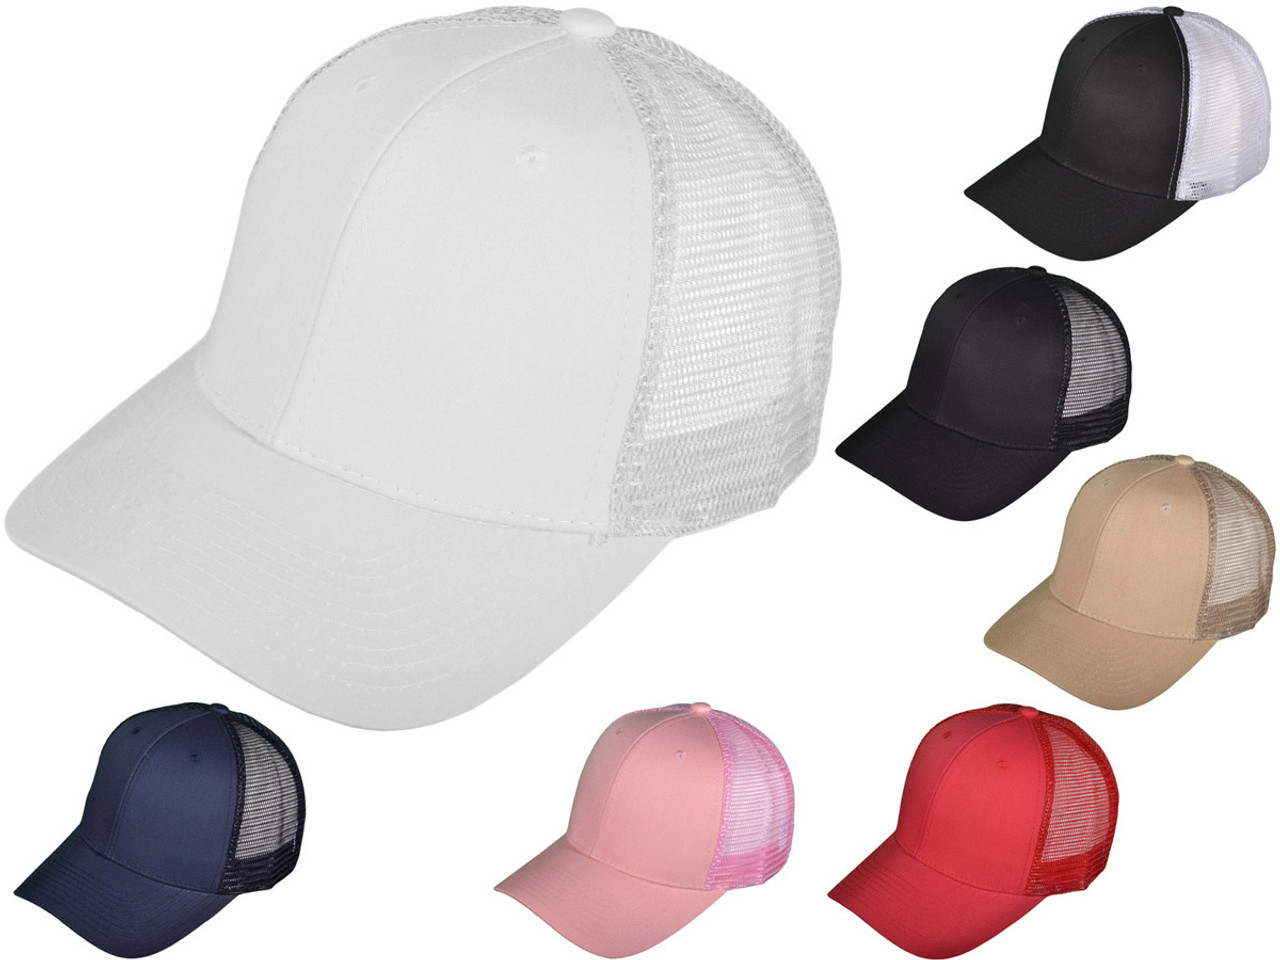 Blank Trucker Hats - Structured Cotton Mesh BK Caps (7 Colors Available) - 5030